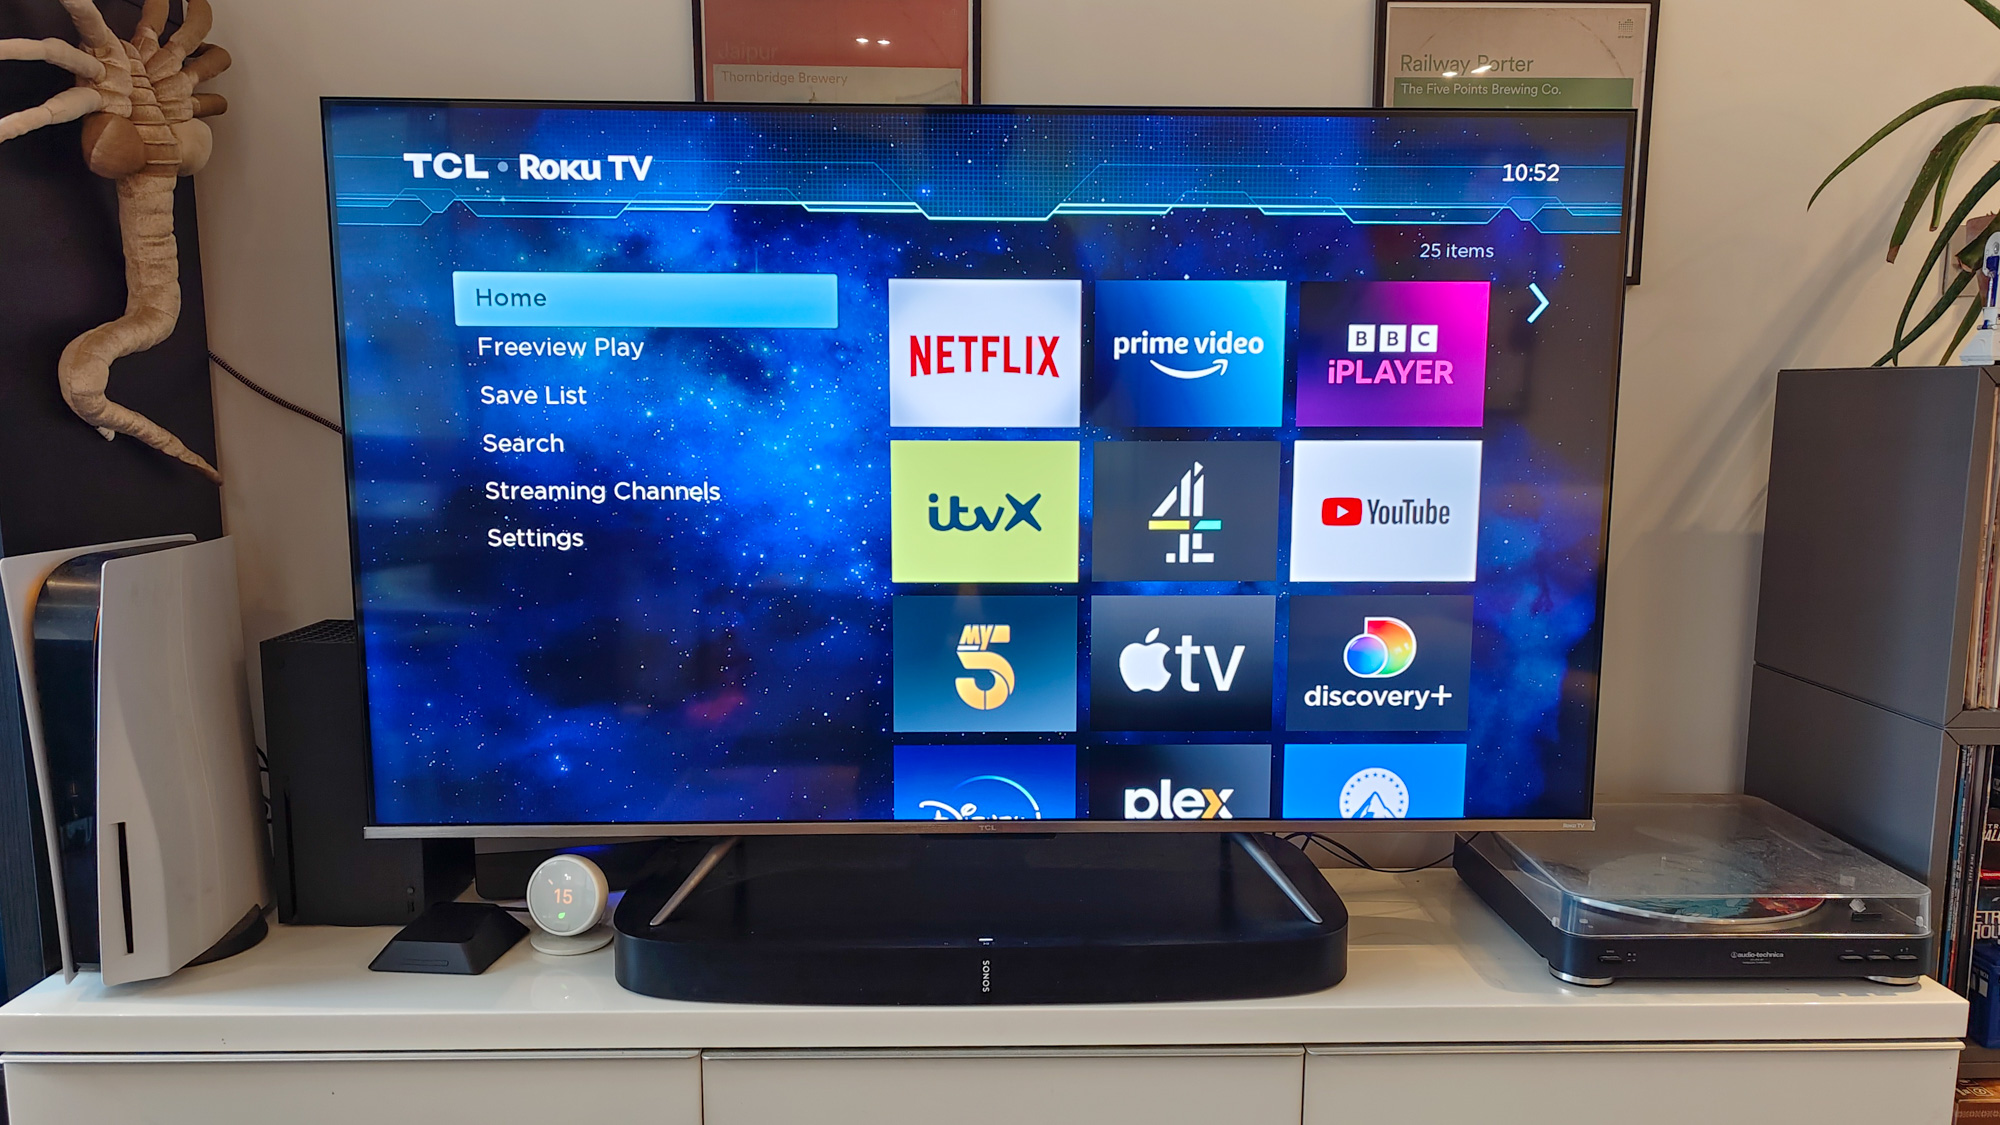 how-to-connect-phone-to-tcl-tv-using-bluetooth